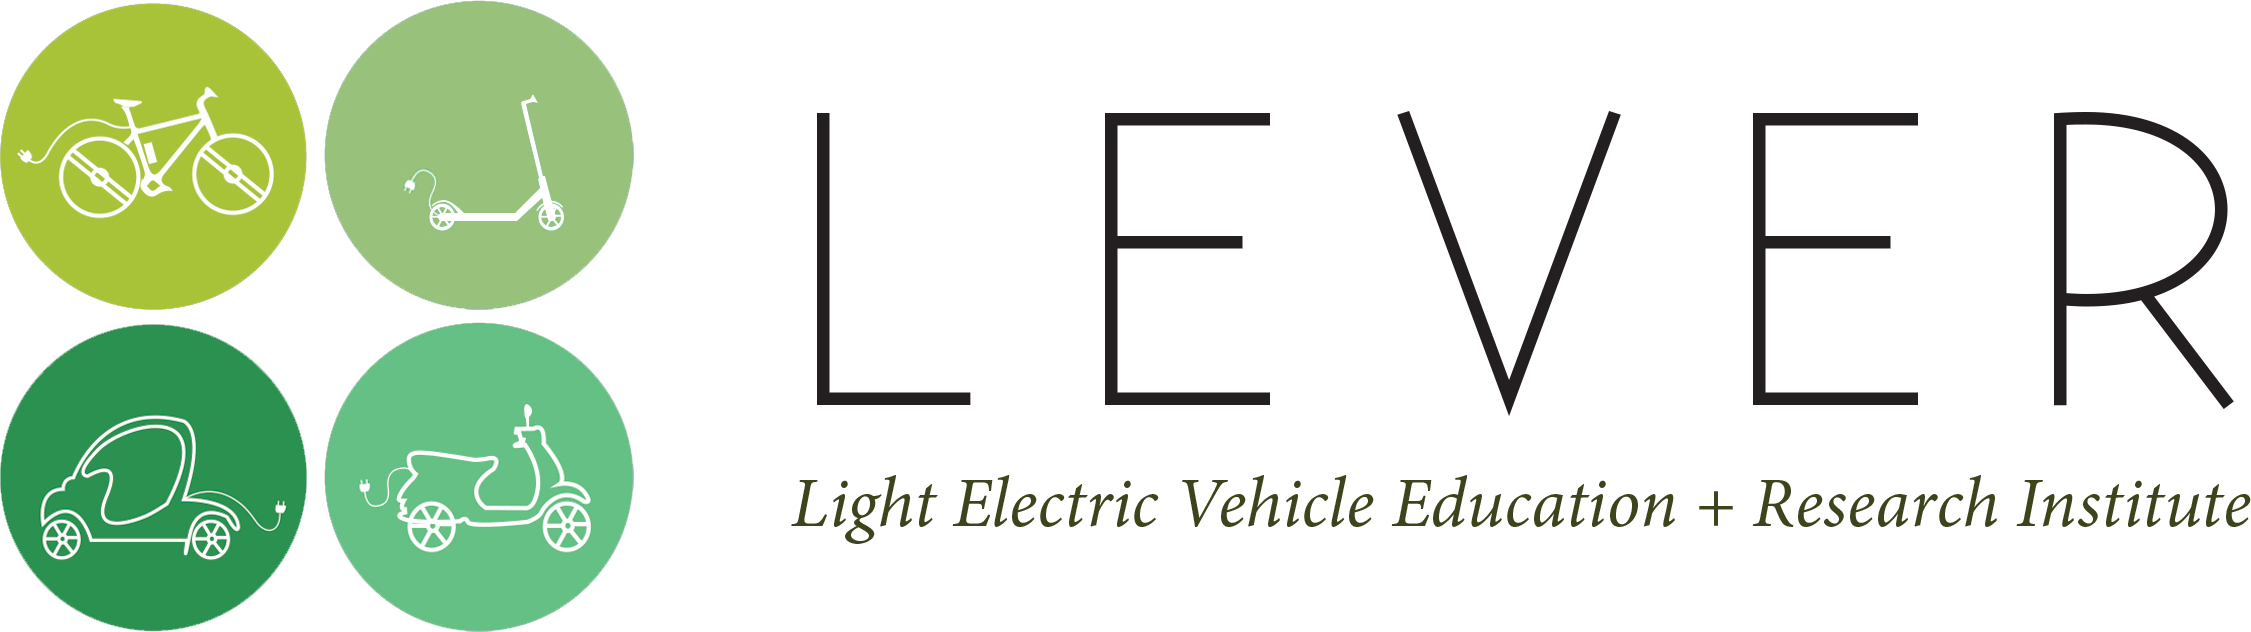 Light Electric Vehicle Education & Research